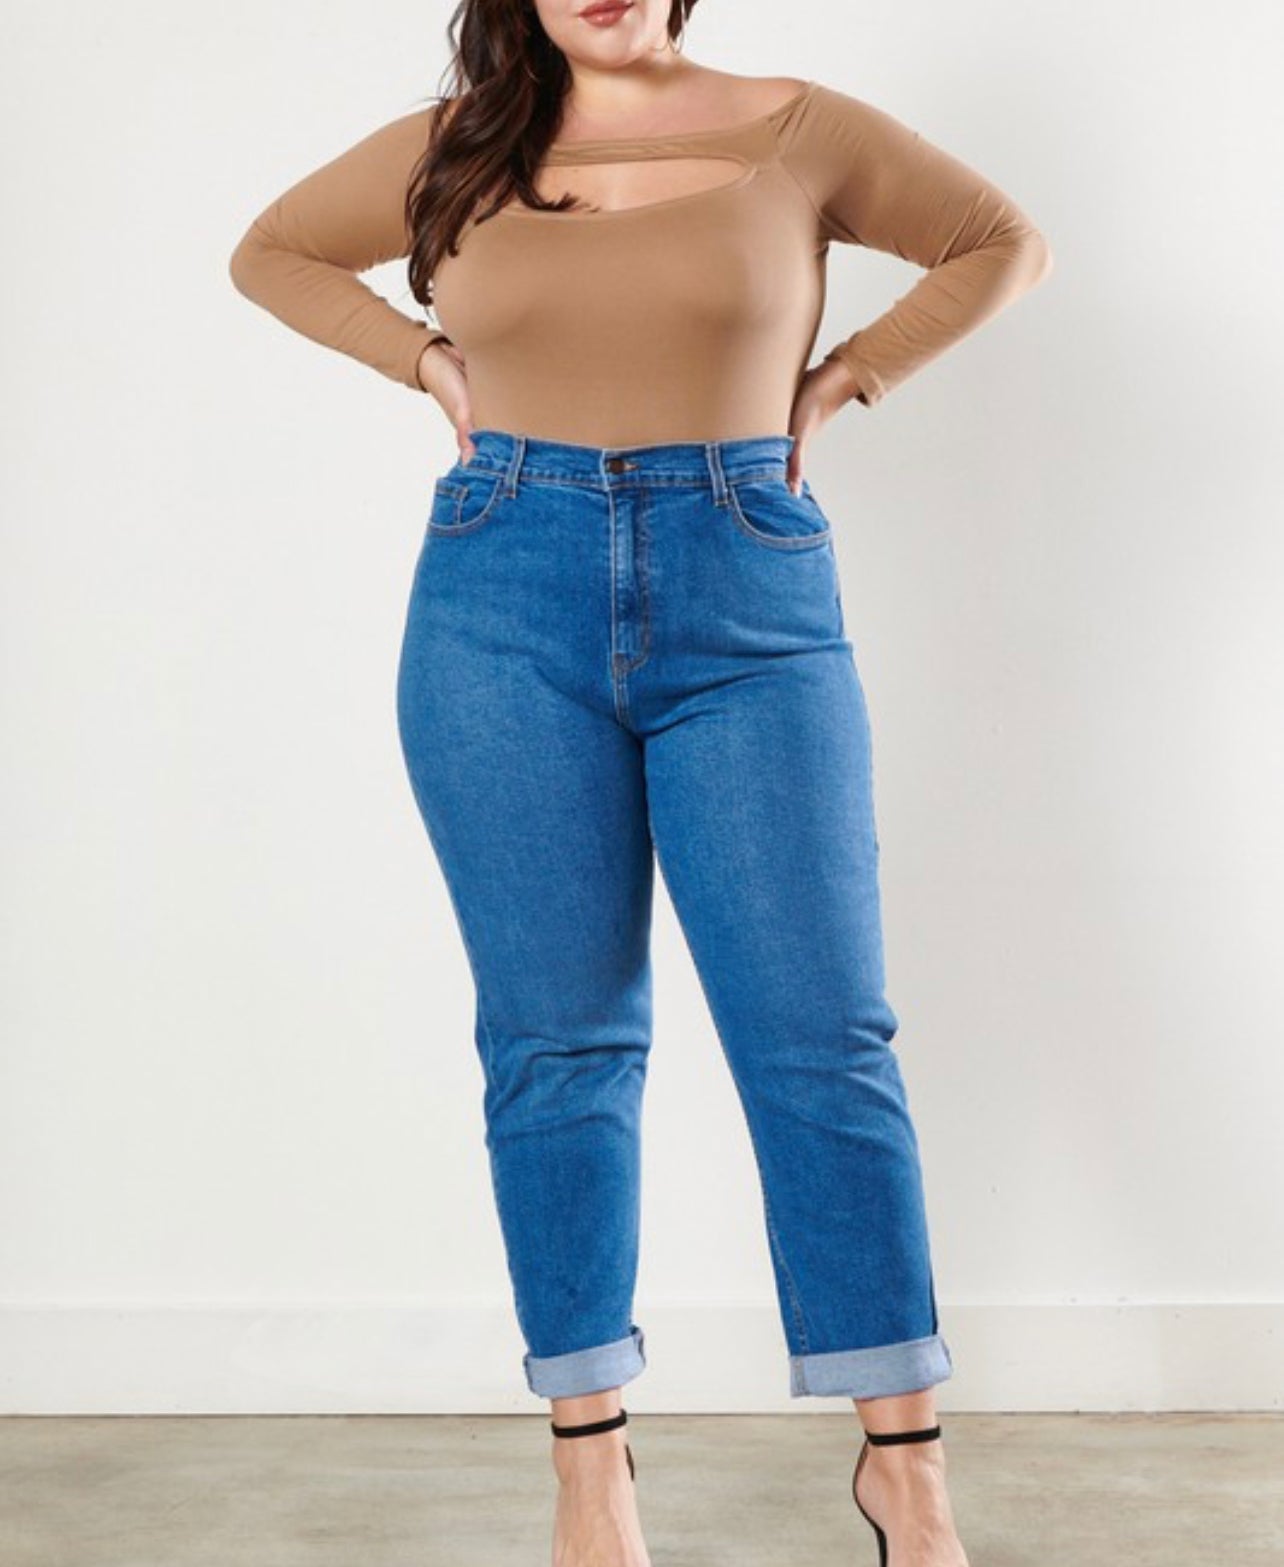 Curvy model wearing Classic High waisted angle jeans while  facing the camera to capture the lips down